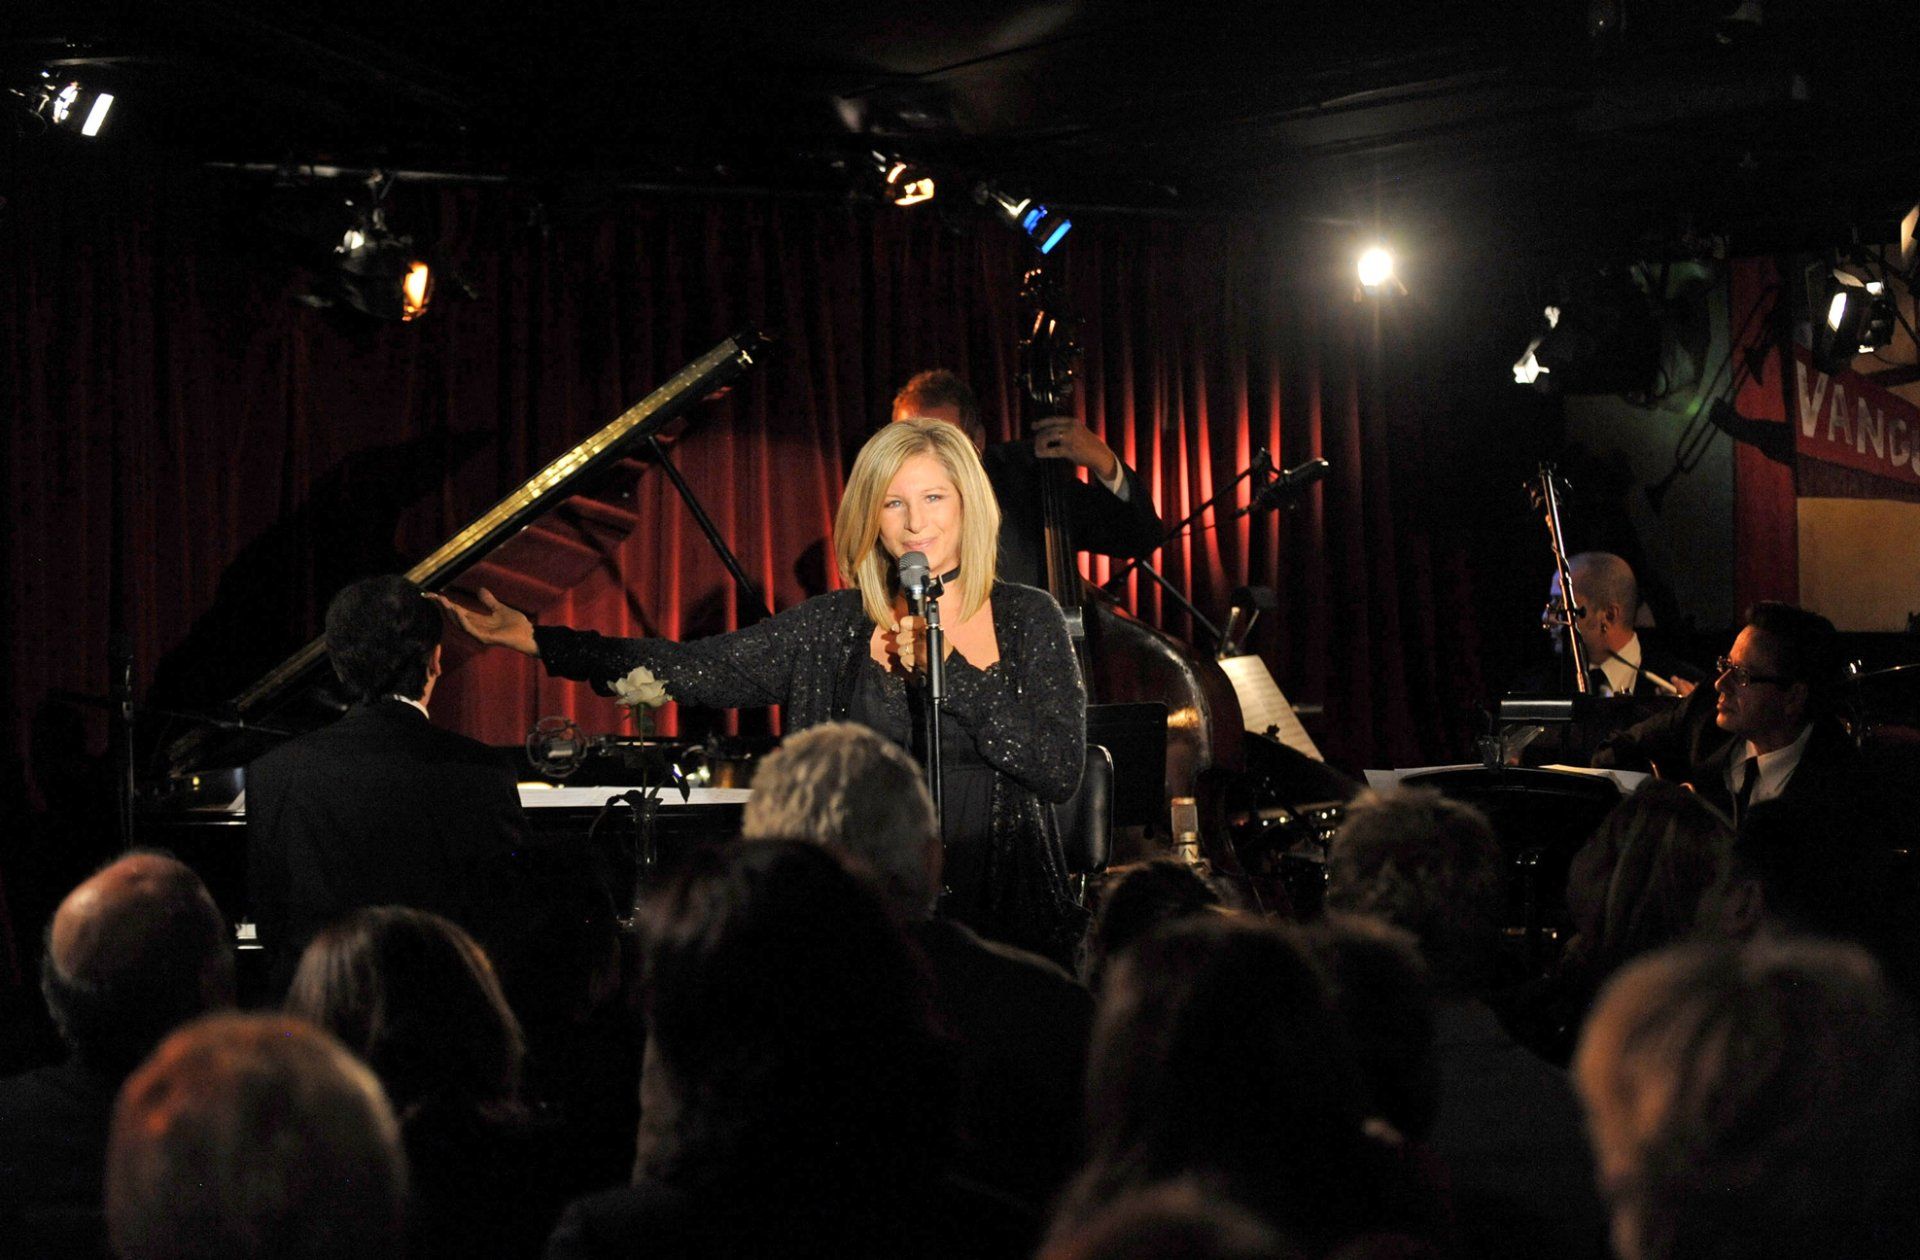 Streisand welcomes the audience to the Village Vanguard